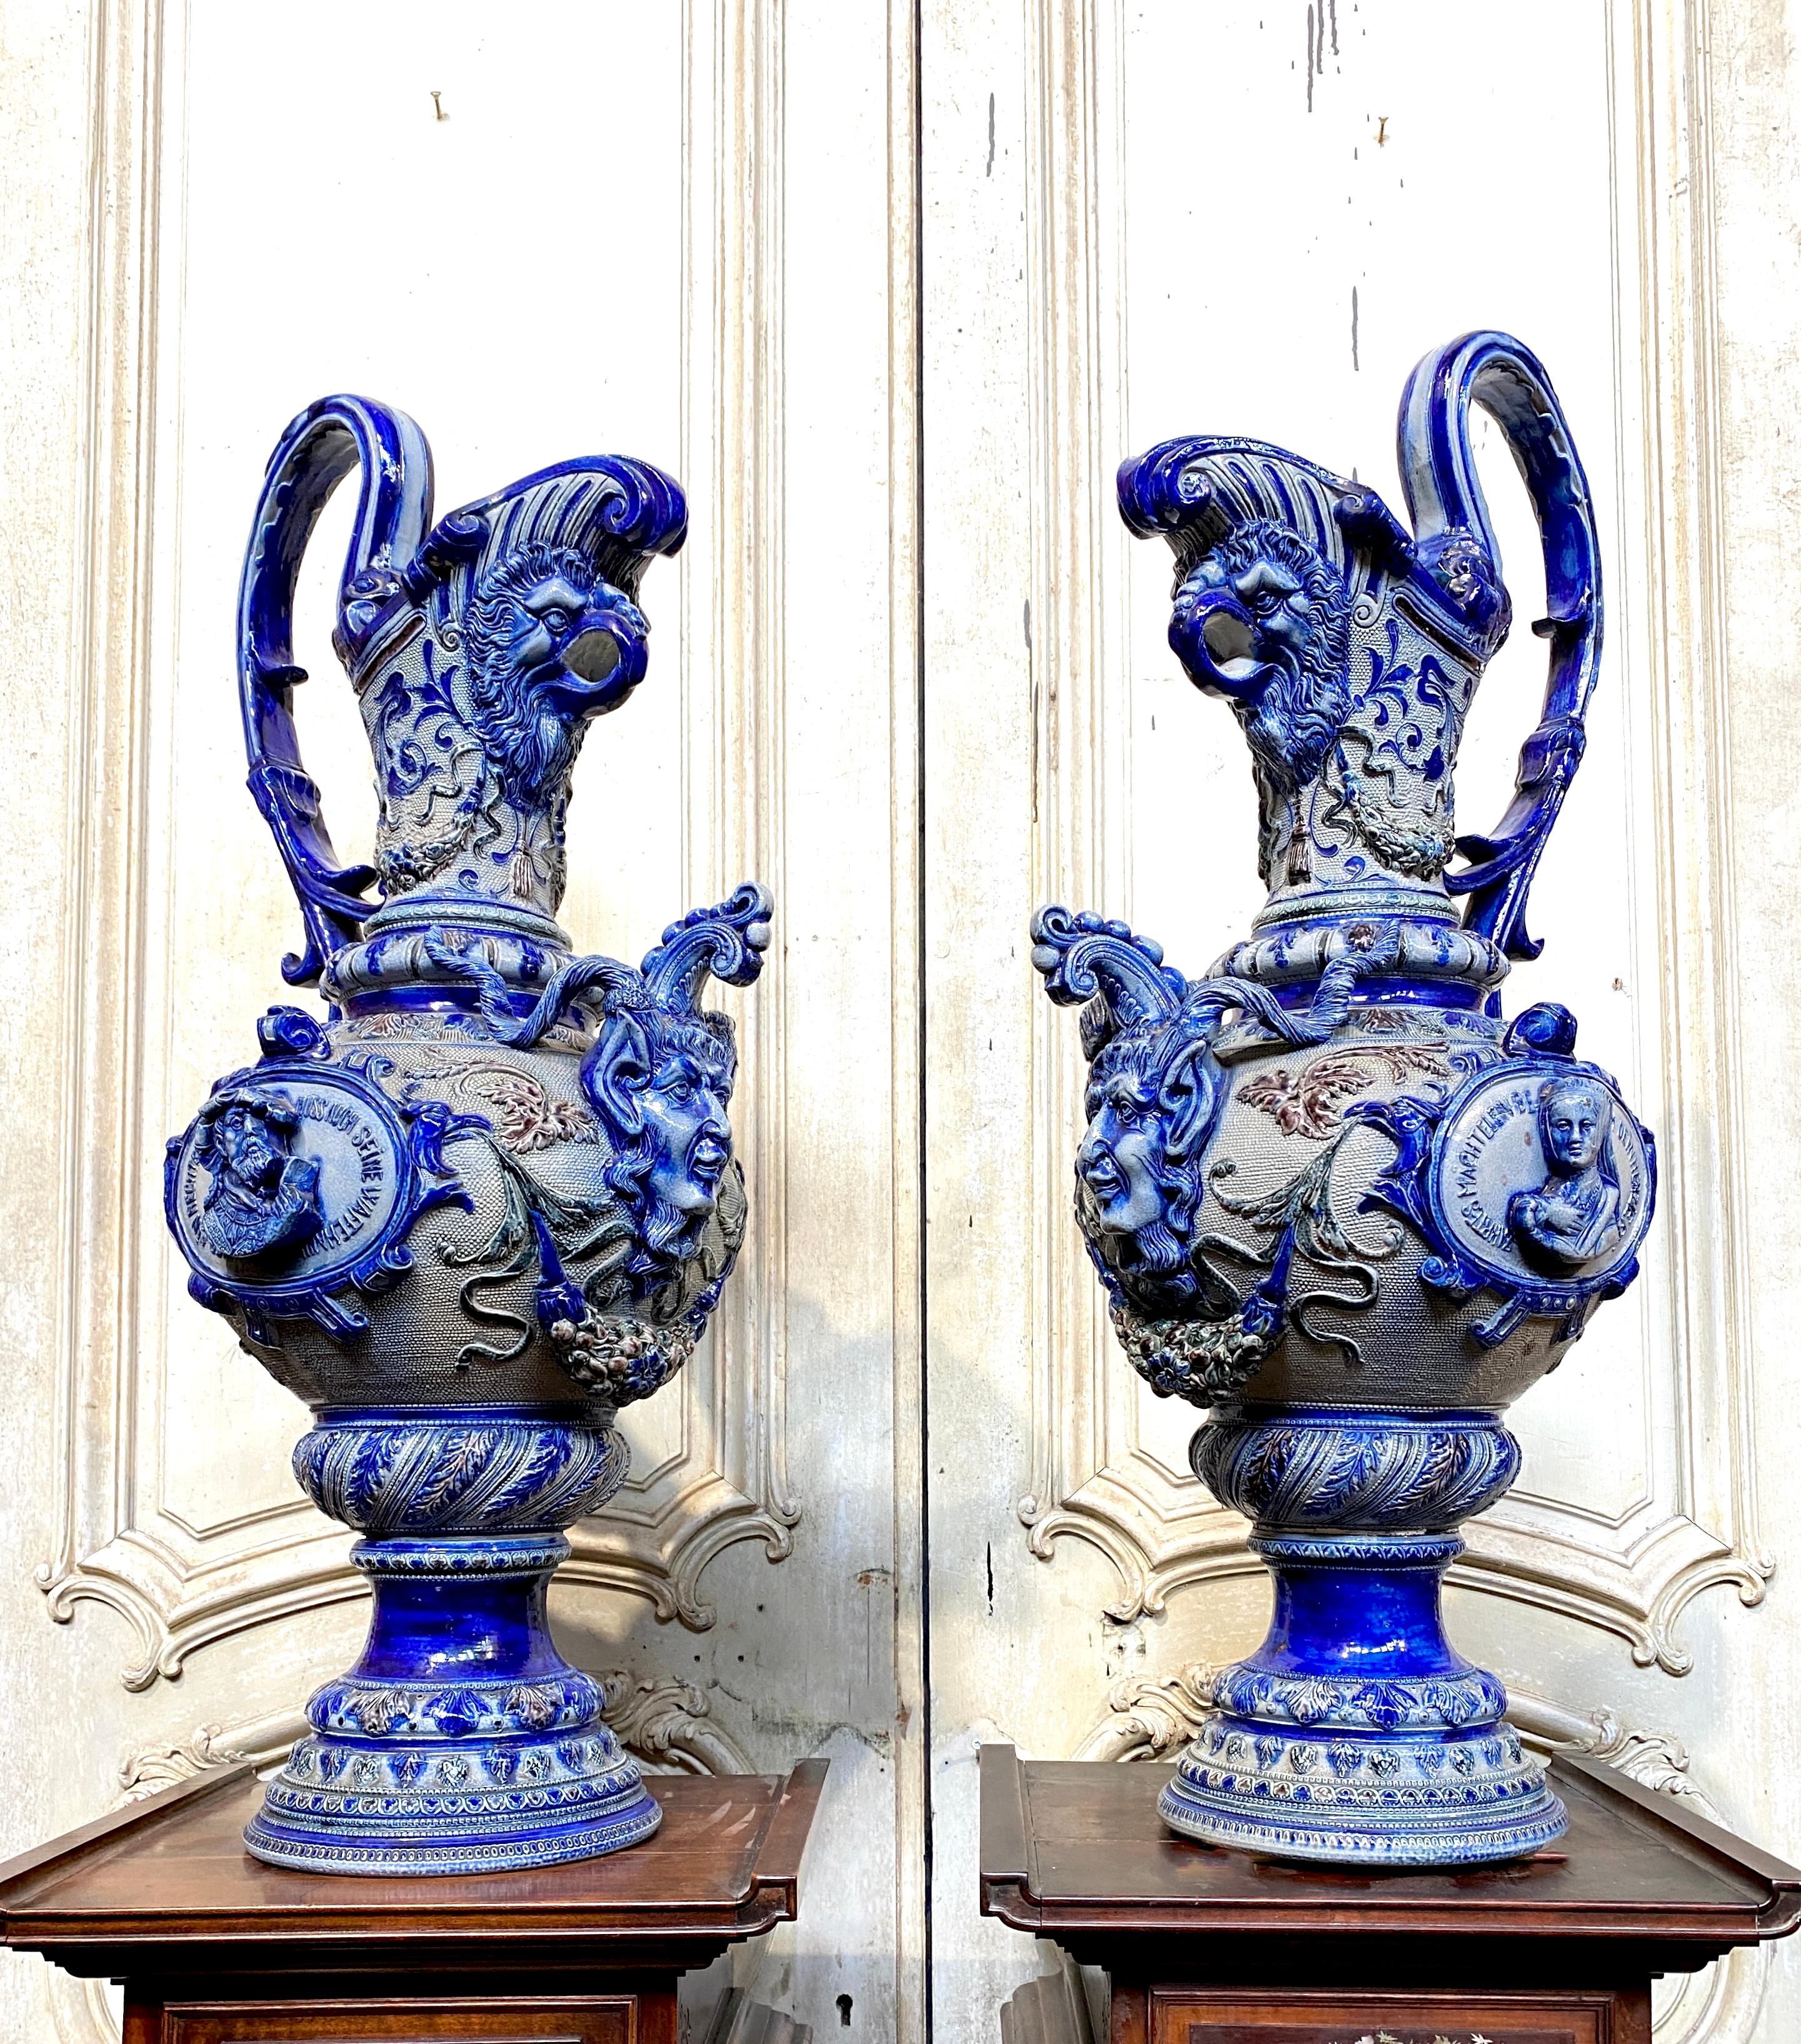 Pair of original Eastern stone ewers from the end of the 19th century. We find a rich decoration of birds' heads, raised foliage and blue faces emerging from a gray background with some purple reflections. Very good condition, no accidents and no